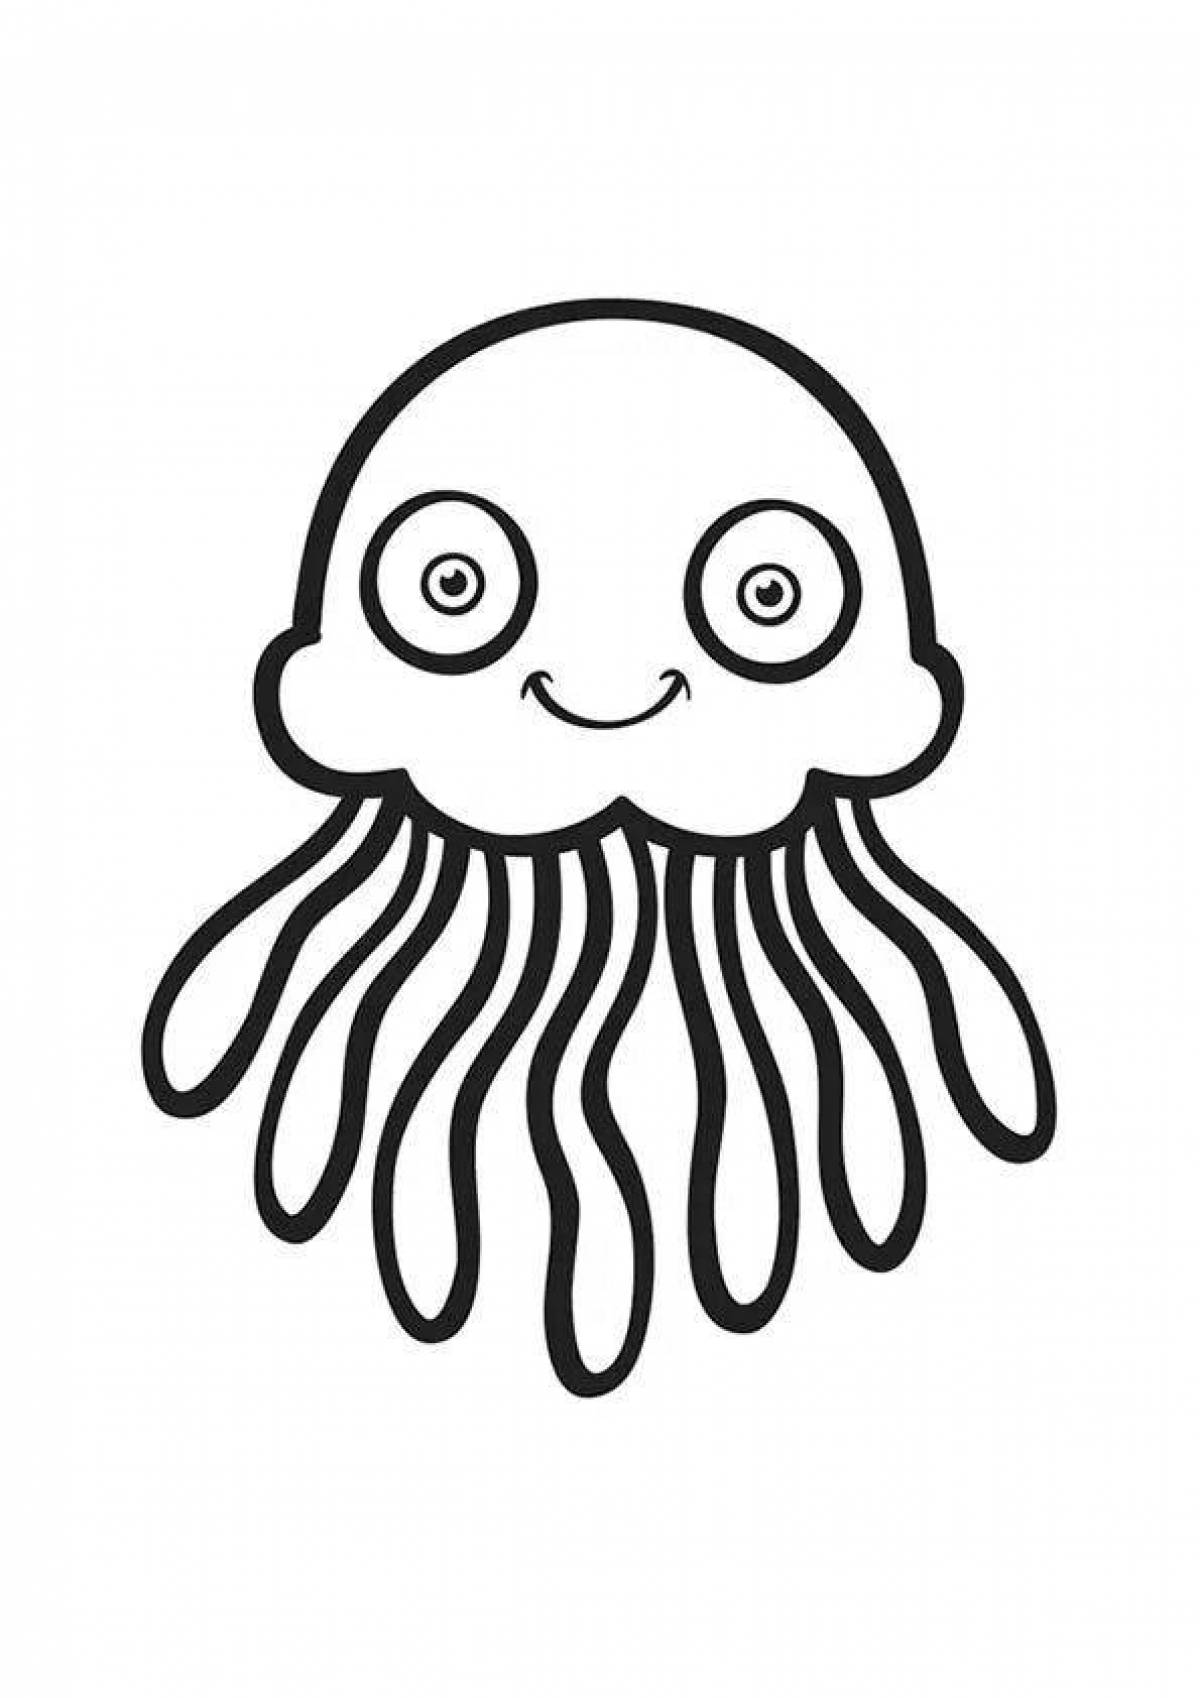 Glorious jellyfish coloring book for kids